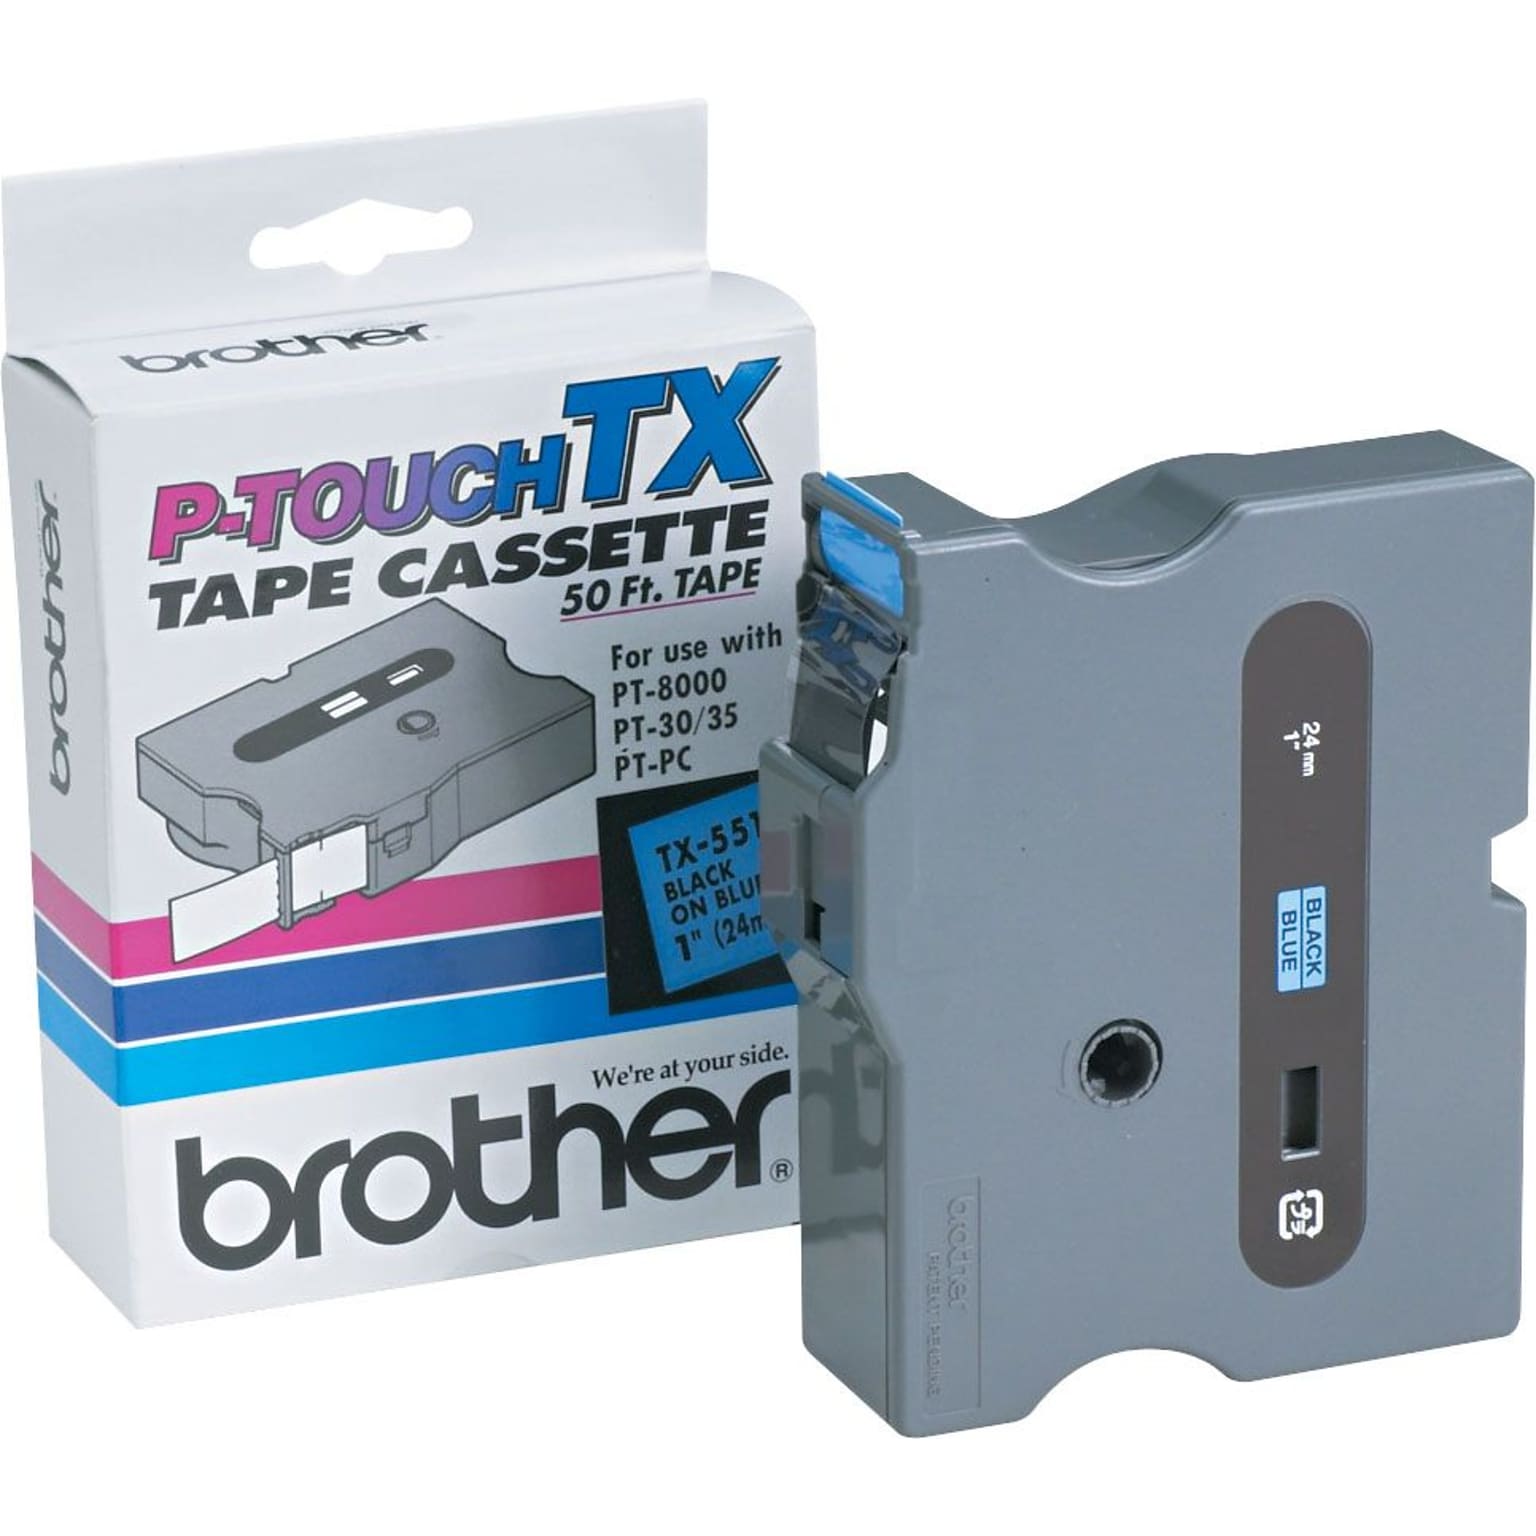 Brother P-touch TX-5511 Laminated Label Maker Tape, 1 x 50, Black On Blue (TX-5511)